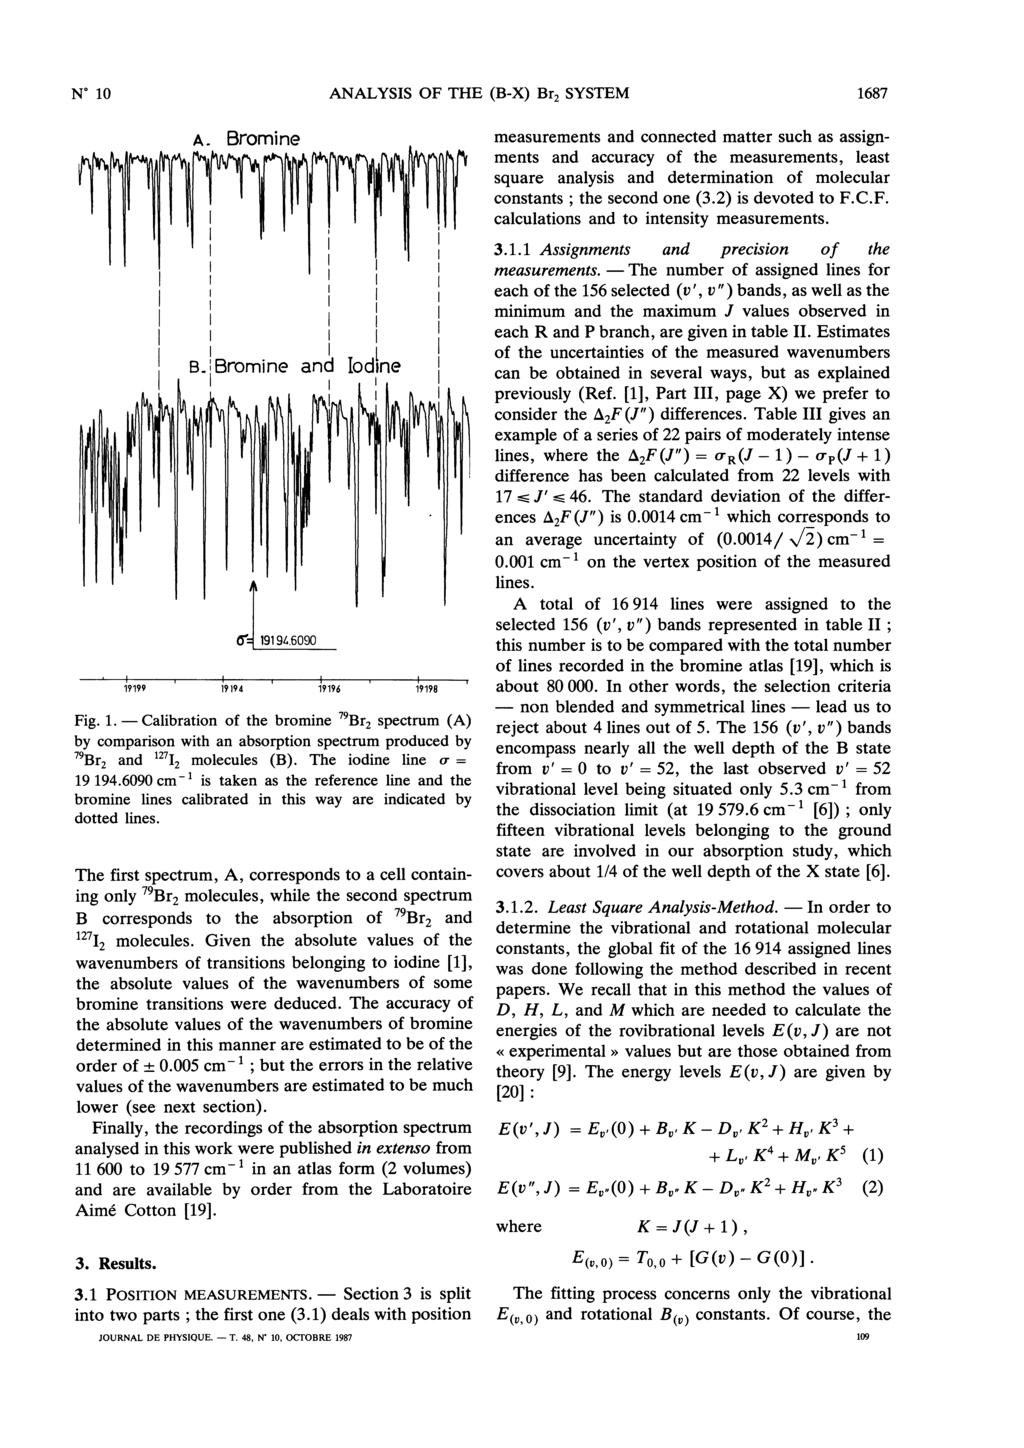 Calibration non The lead In 1687 Fig. 1. of the bromine 7 Br, spectrum (A) by comparison with an absorption spectrum produced by 9Br2 and 127I2 molecules (B). The iodine line u 19 194.